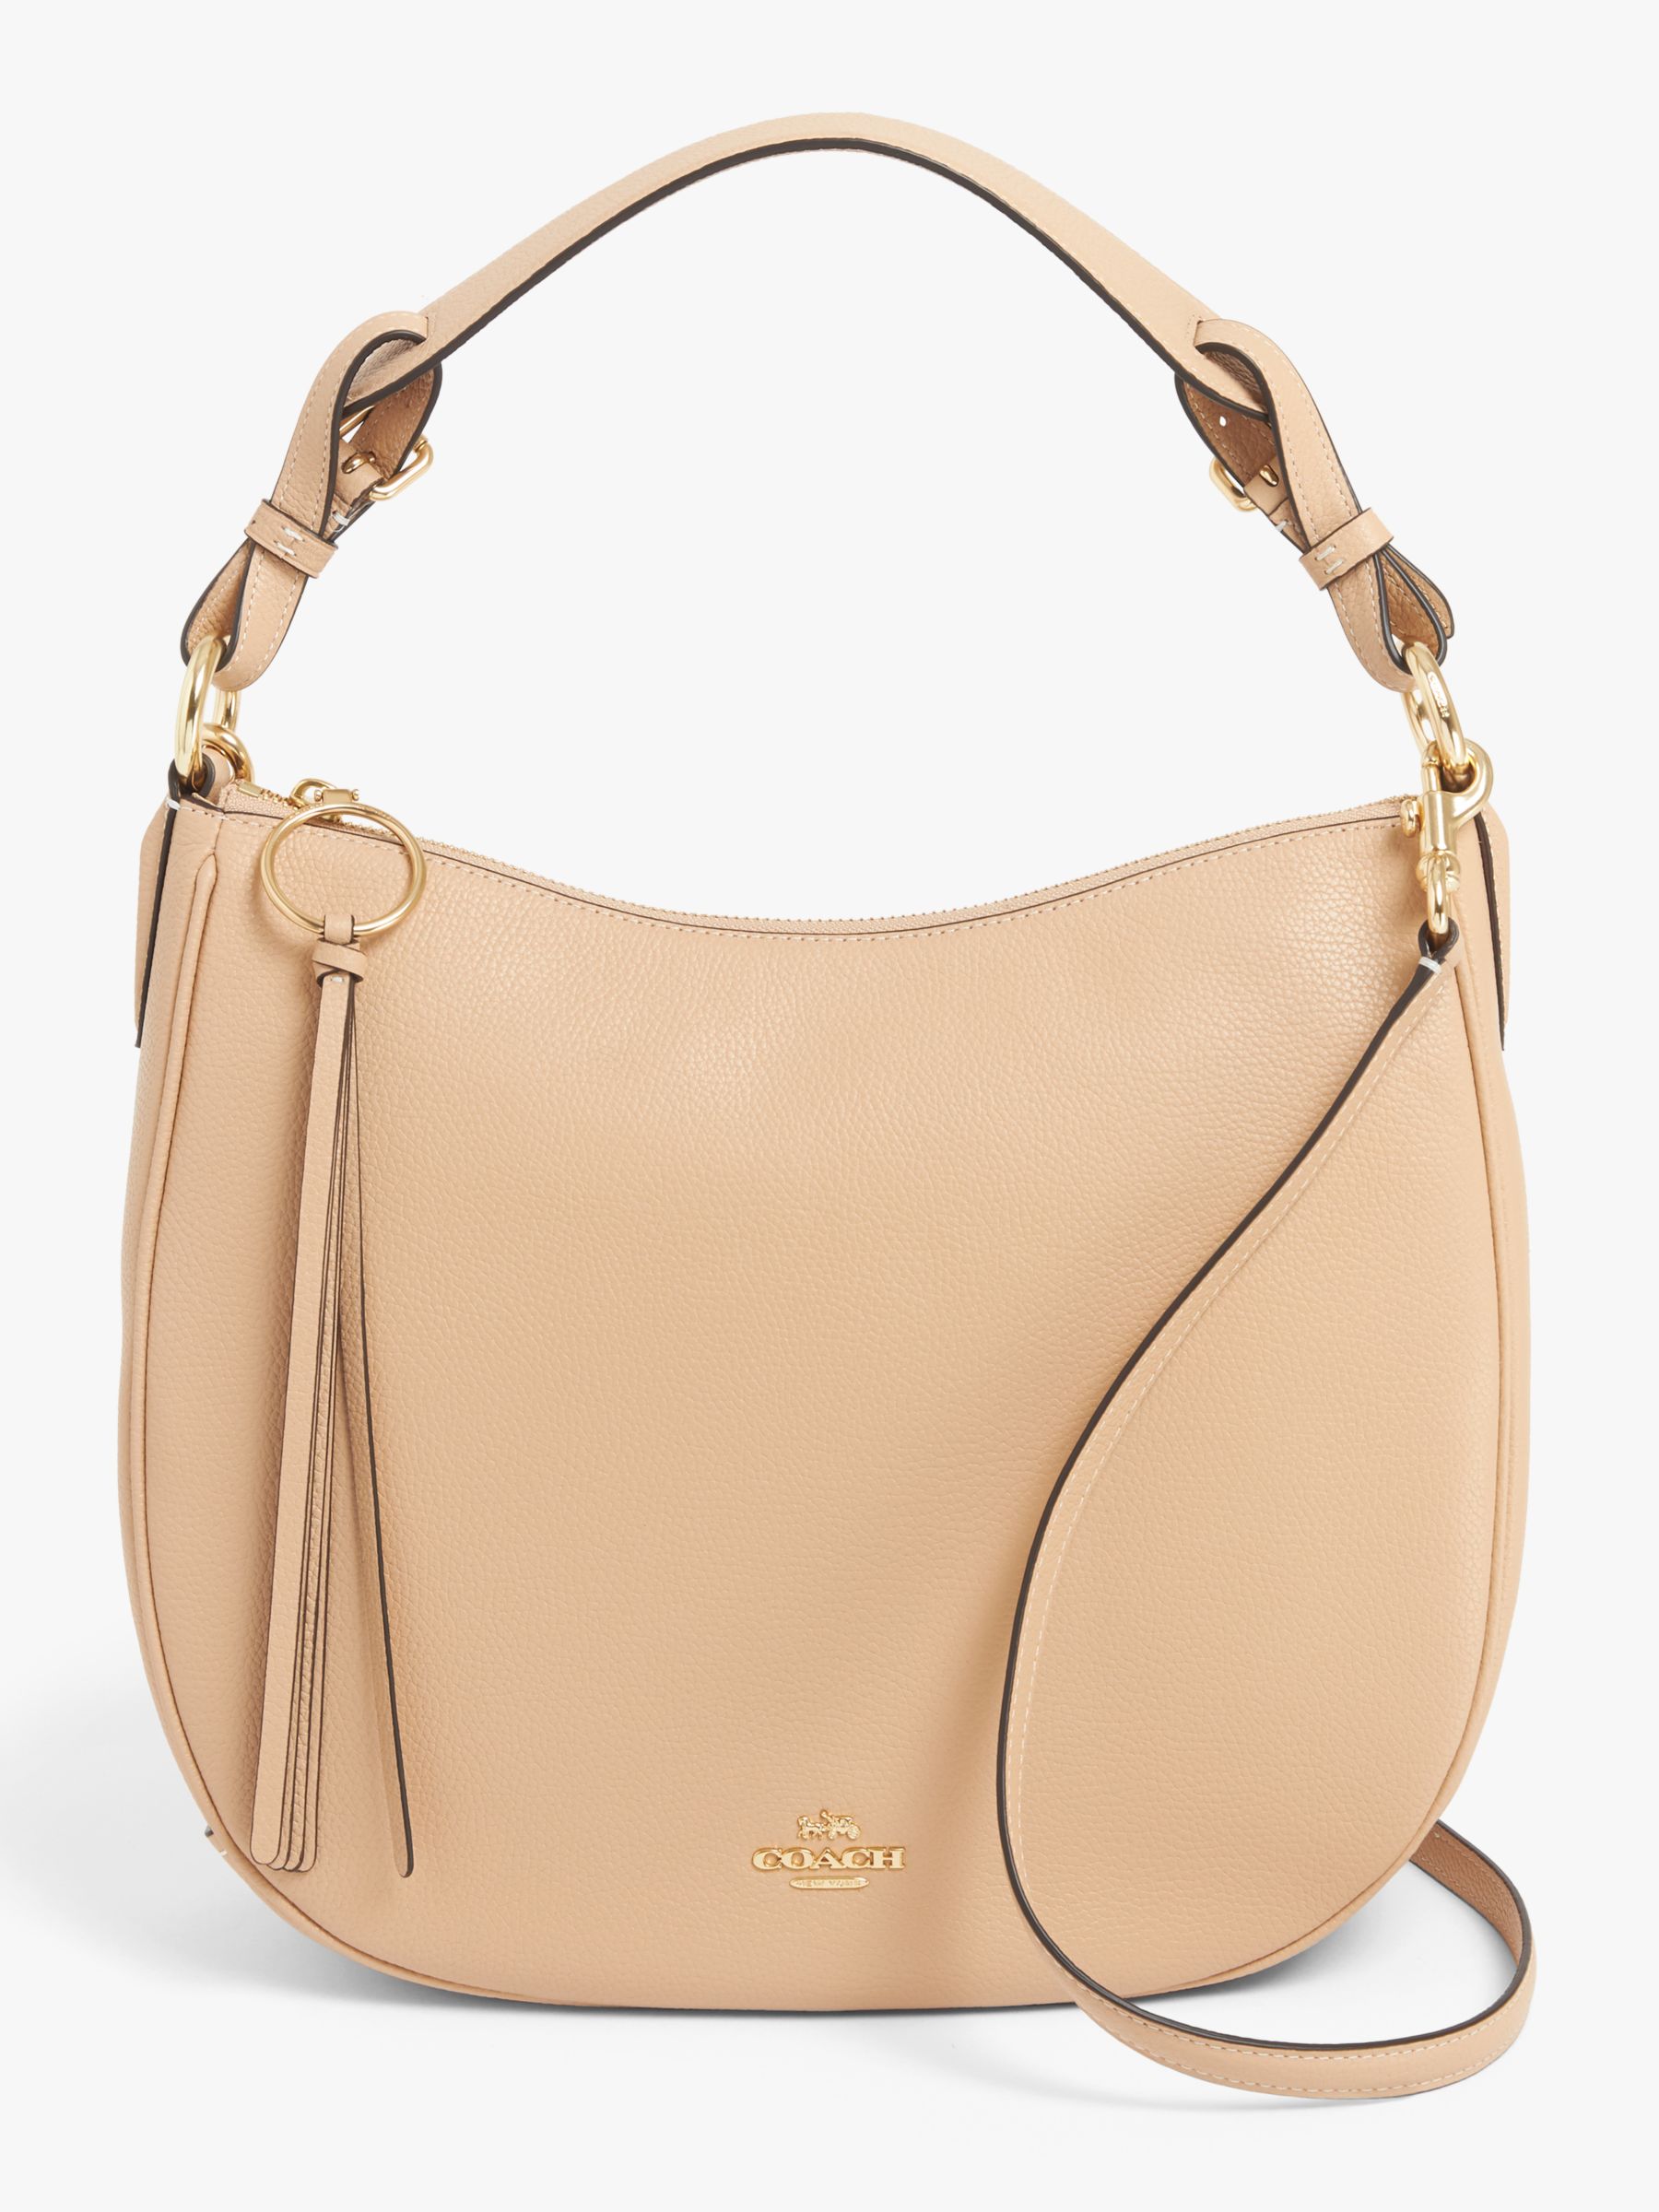 Coach Sutton Pebbled Leather Hobo Bag, Beechwood at John Lewis & Partners